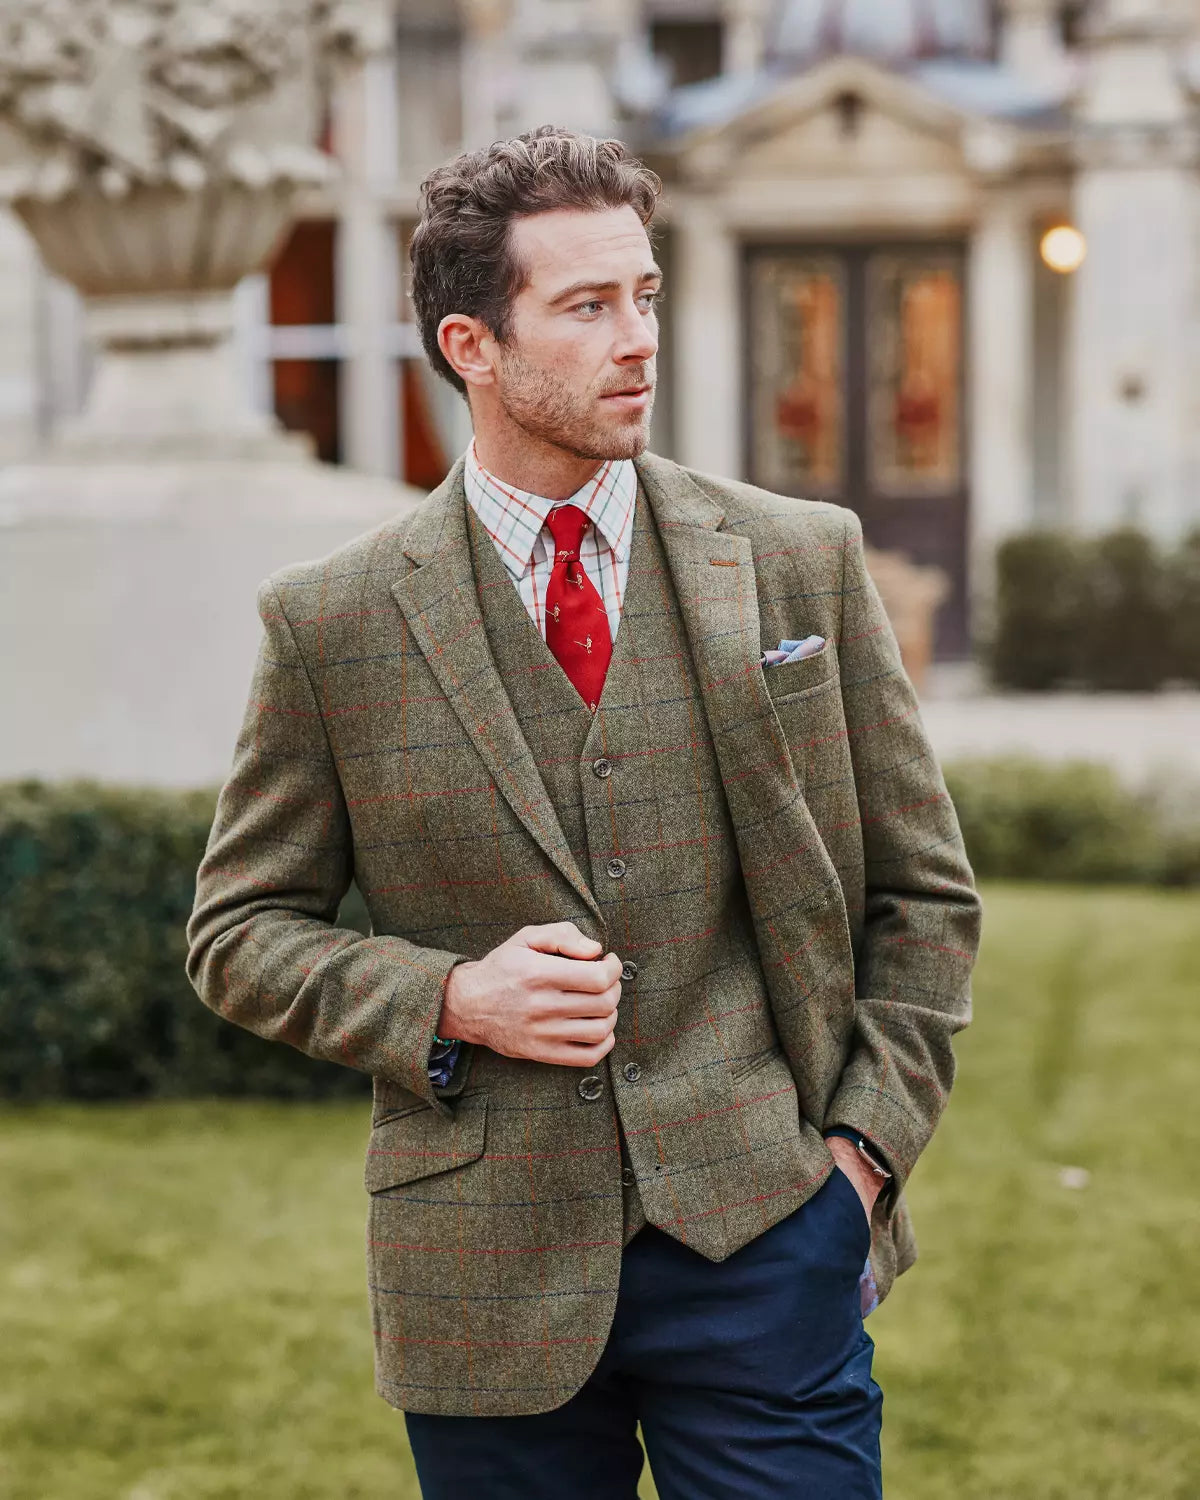 Pairing Tweeds and T-Shirts for Fall